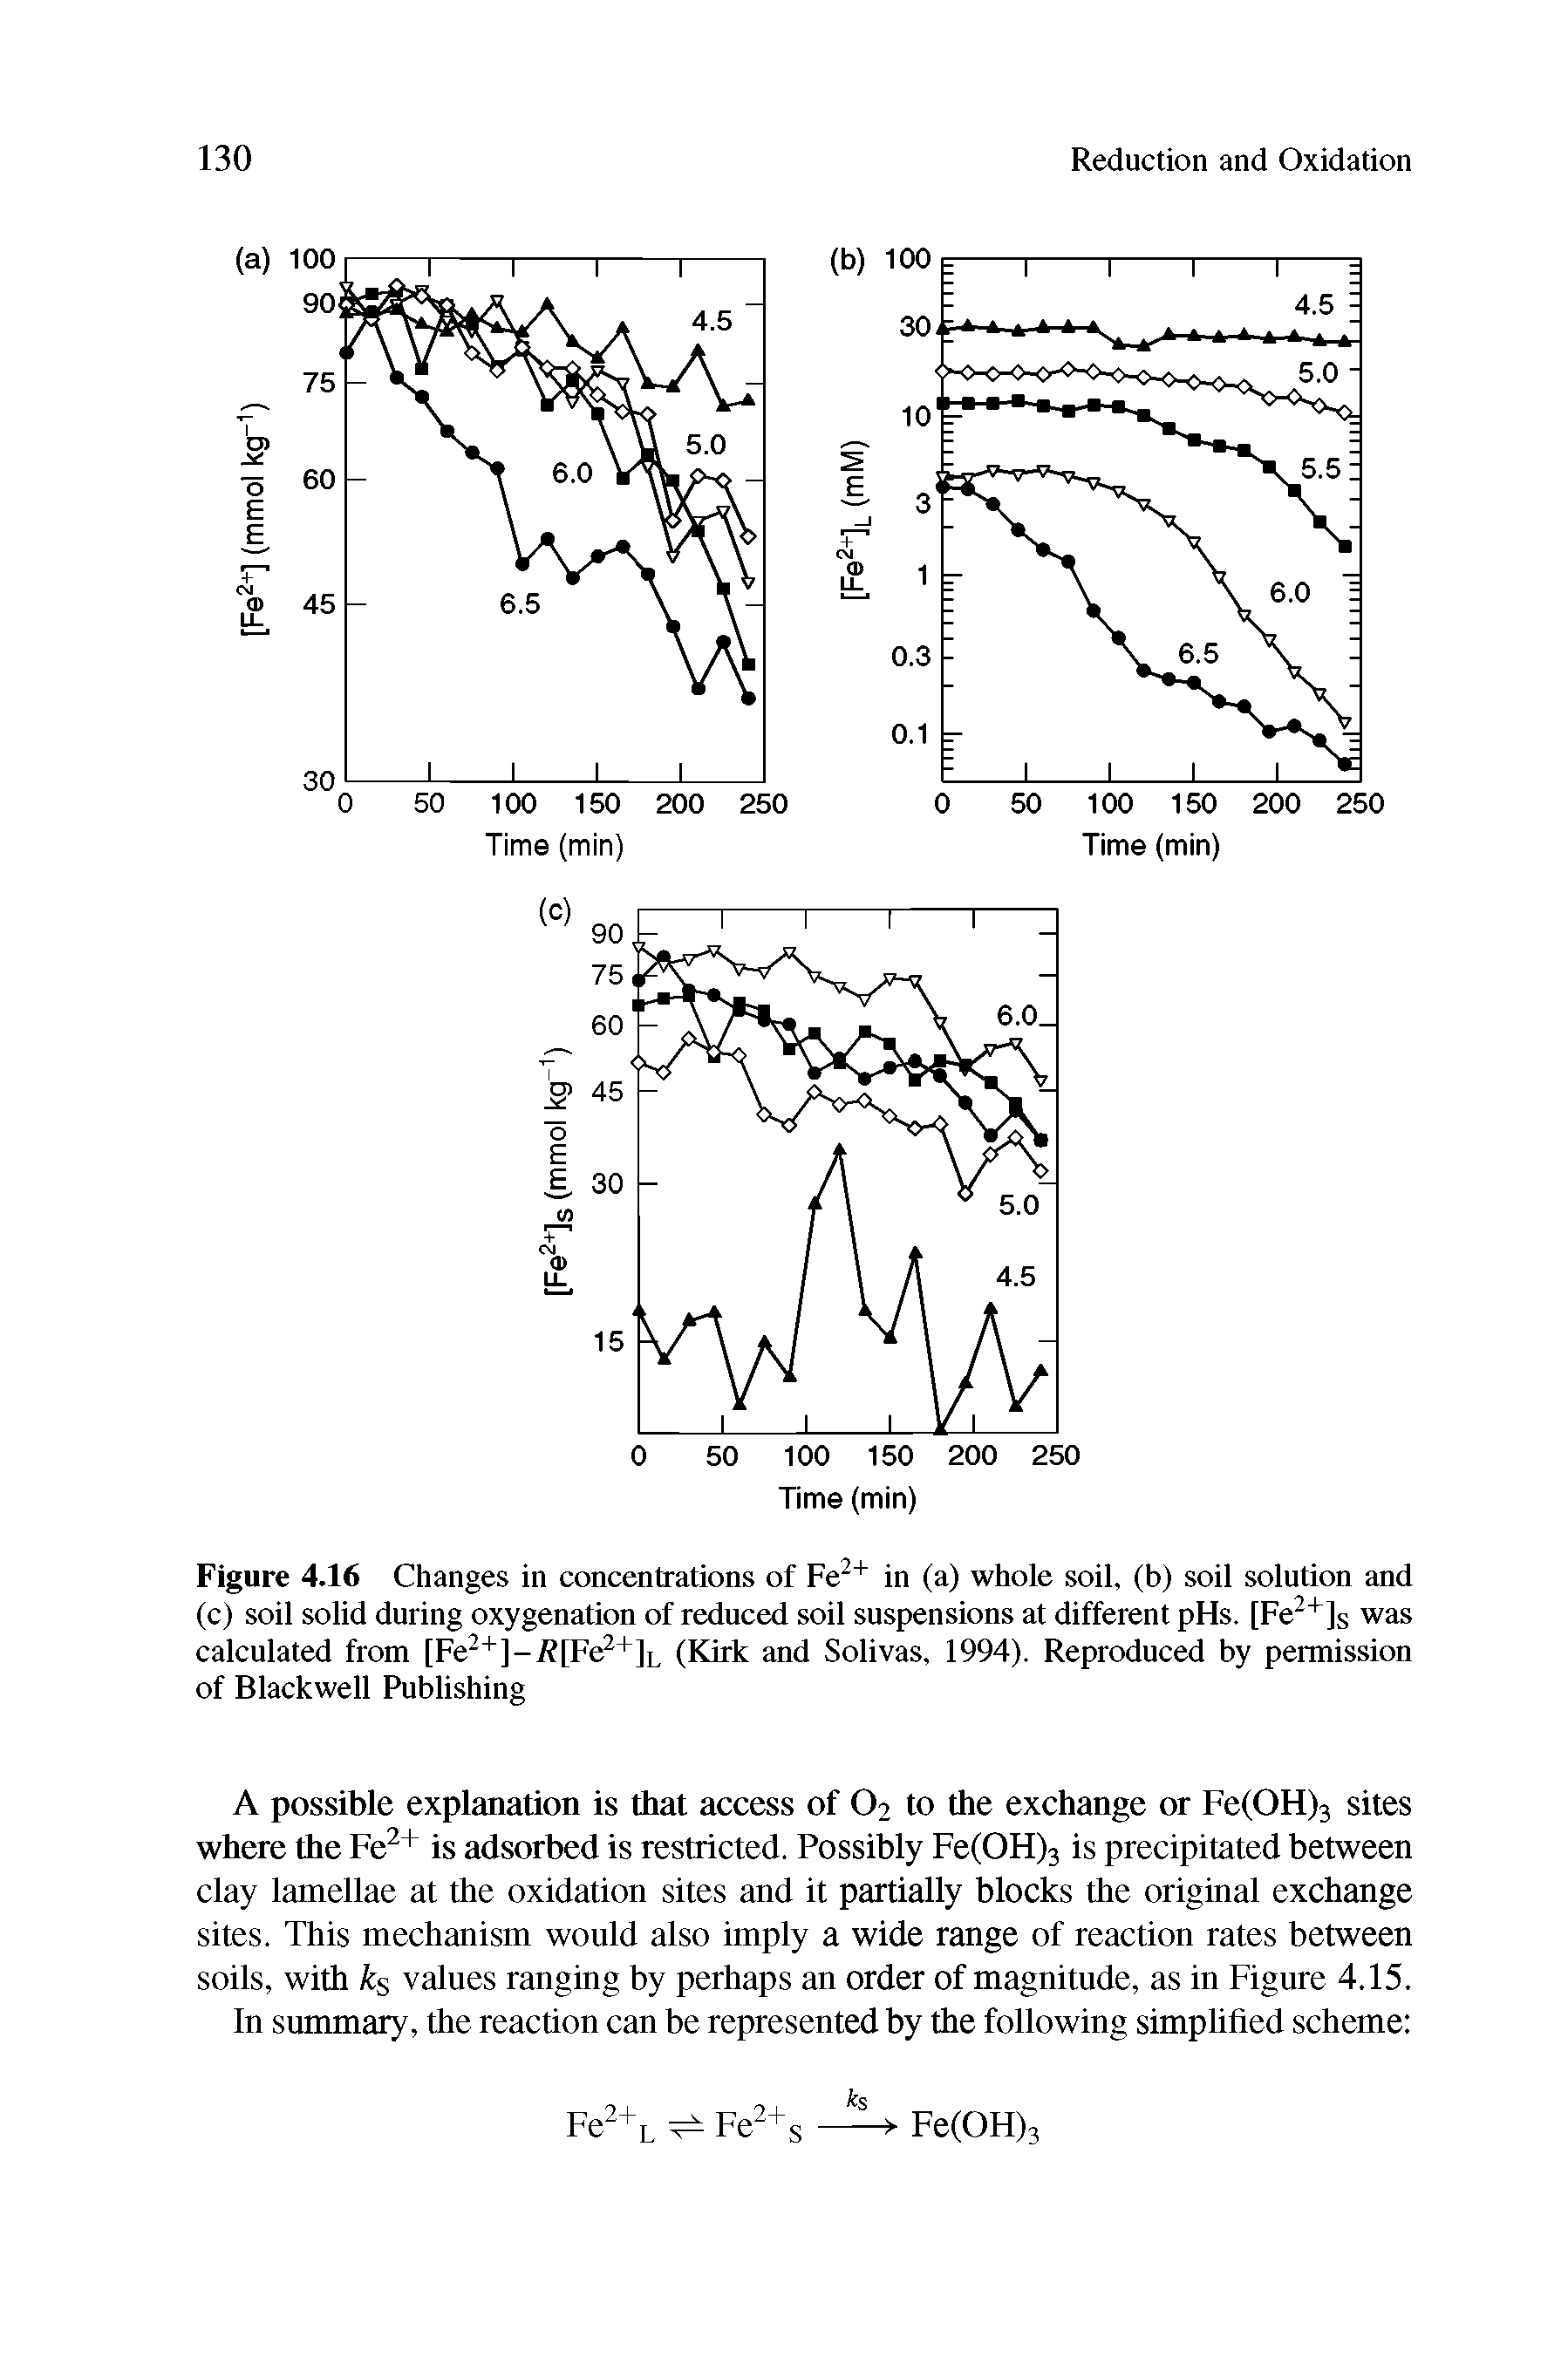 Figure 4.16 Changes in concentrations of Fe in (a) whole soil, (b) soil solution and (c) soil solid during oxygenation of rednced soil suspensions at different pHs. [Fe ]s was calculated from [Fe ]-/f[Fe +]L (Kirk and Solivas, 1994). Reproduced by permission of Blackwell Publishing...